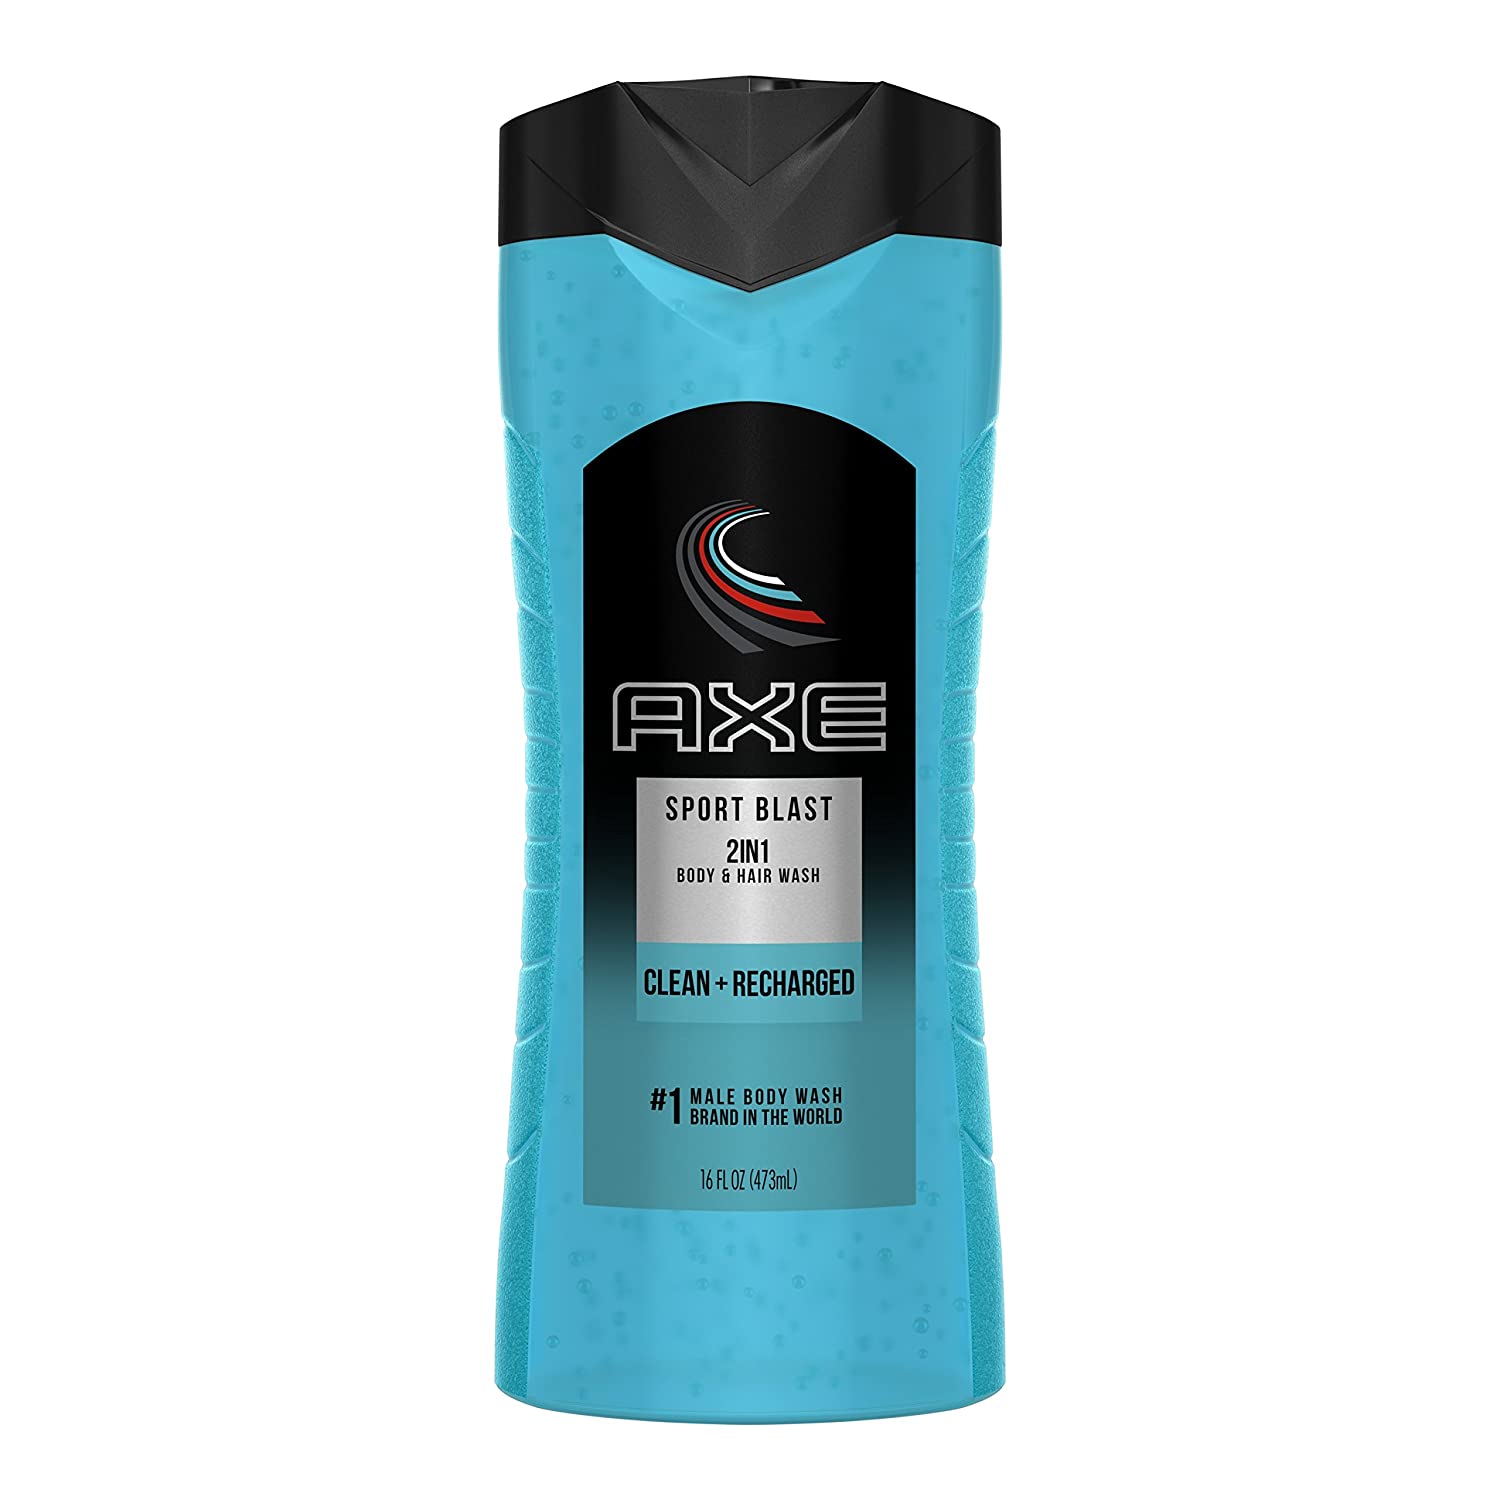 16oz. Axe Sport Blast 2-in-1 Body Wash + Shampoo (Clean + Recharged) $2.54 w/ S&S + Free Shipping w/ Prime or on $25+ at Amazon